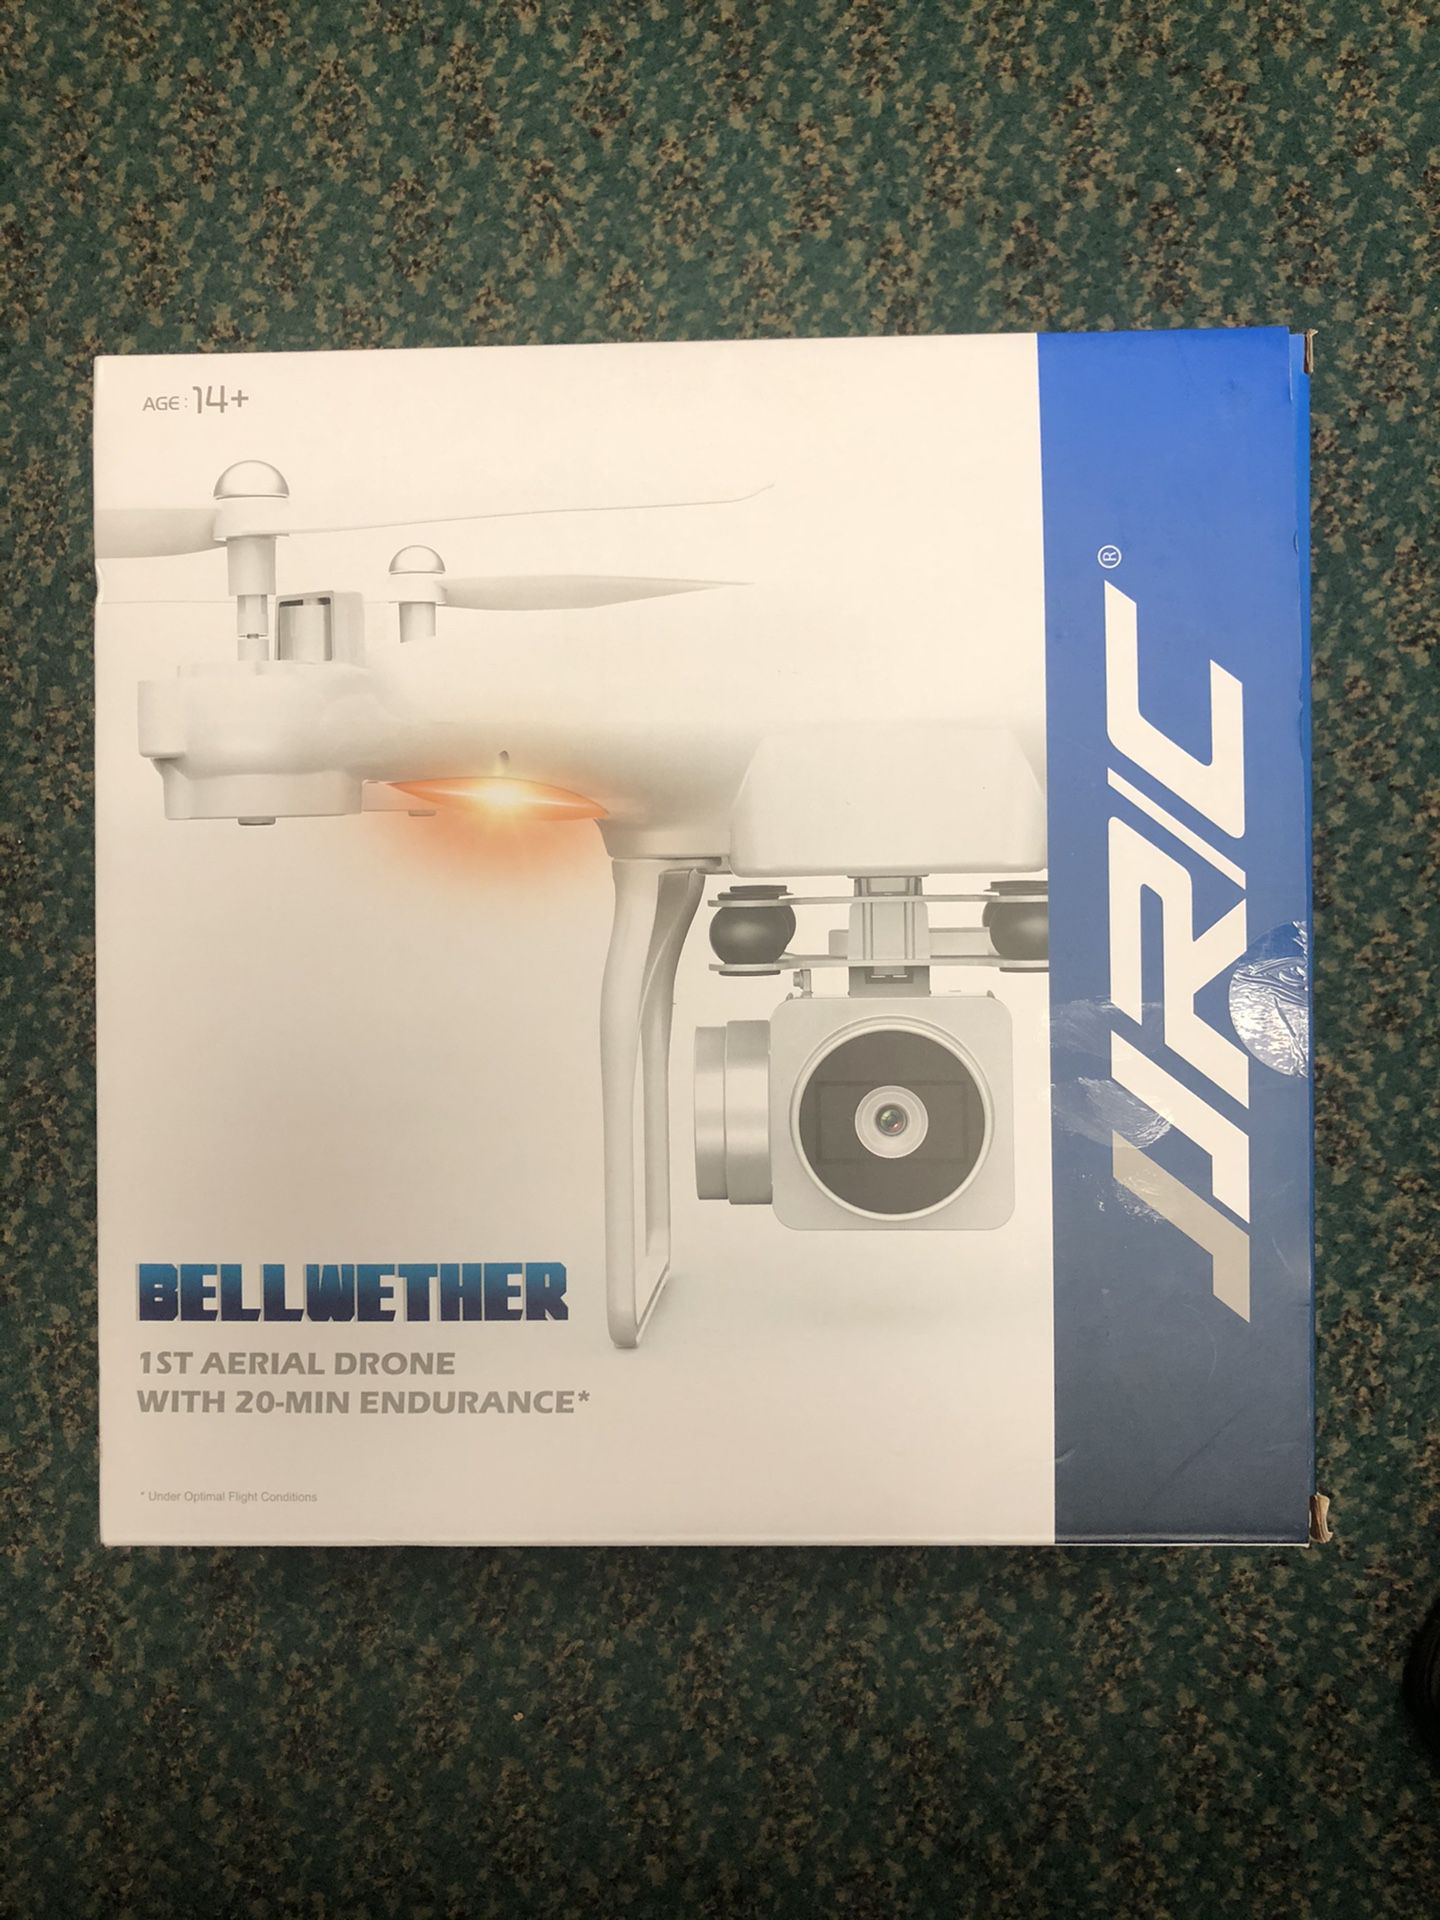 Drone, Electronics JJRC H68 Bellwether 1st Aerial Drone With 20-Min Endurance in Box OPEN